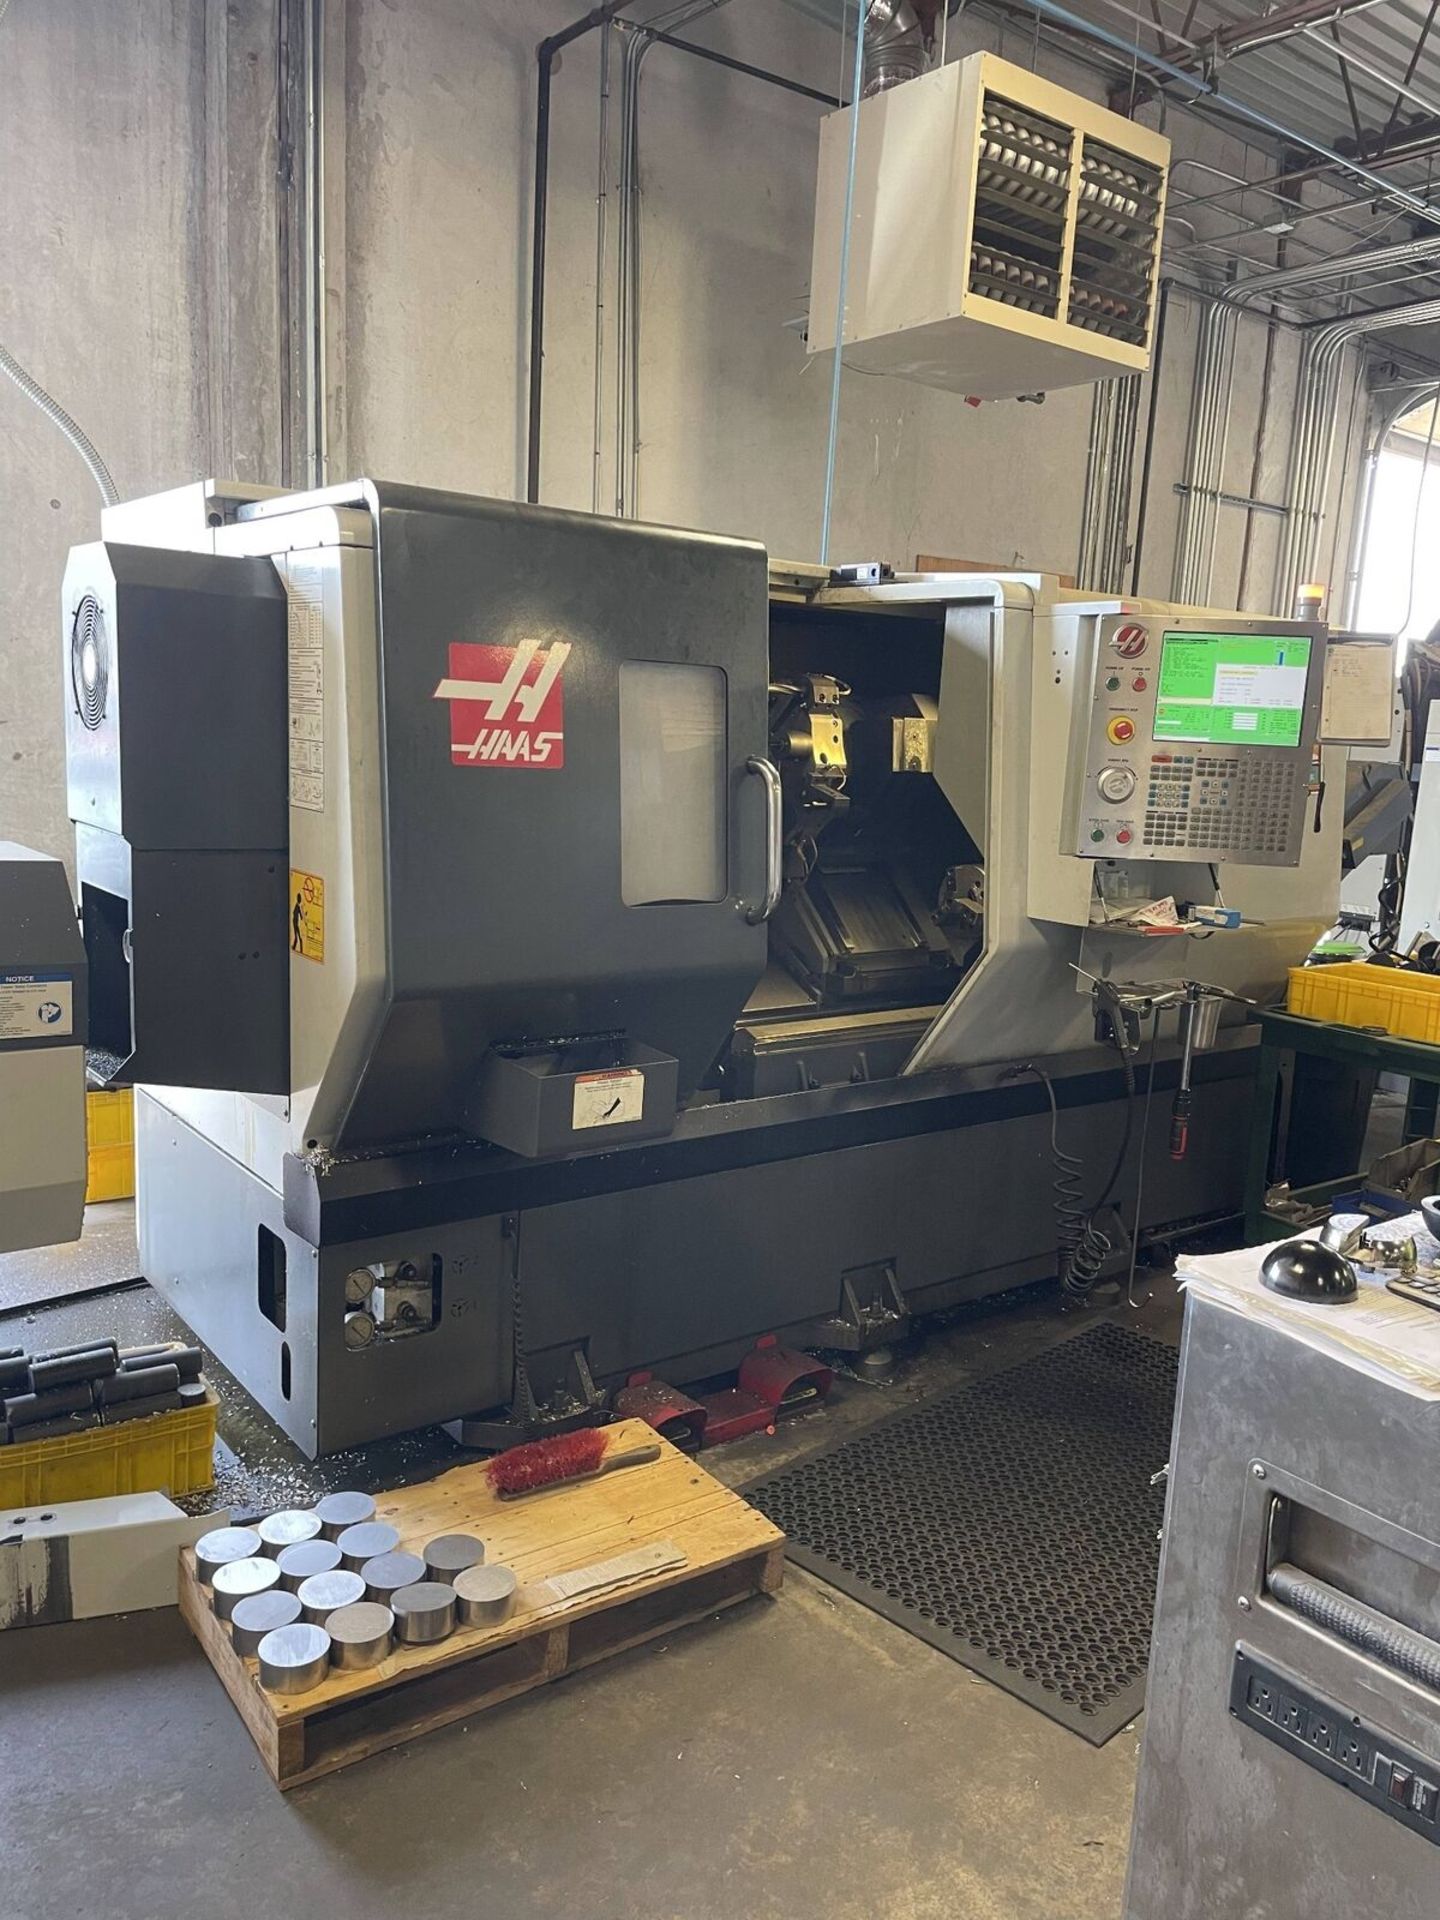 2012 HAAS DS30Y CNC Turning Center With Live Tooling/Dual Spindle/Bar Feeder